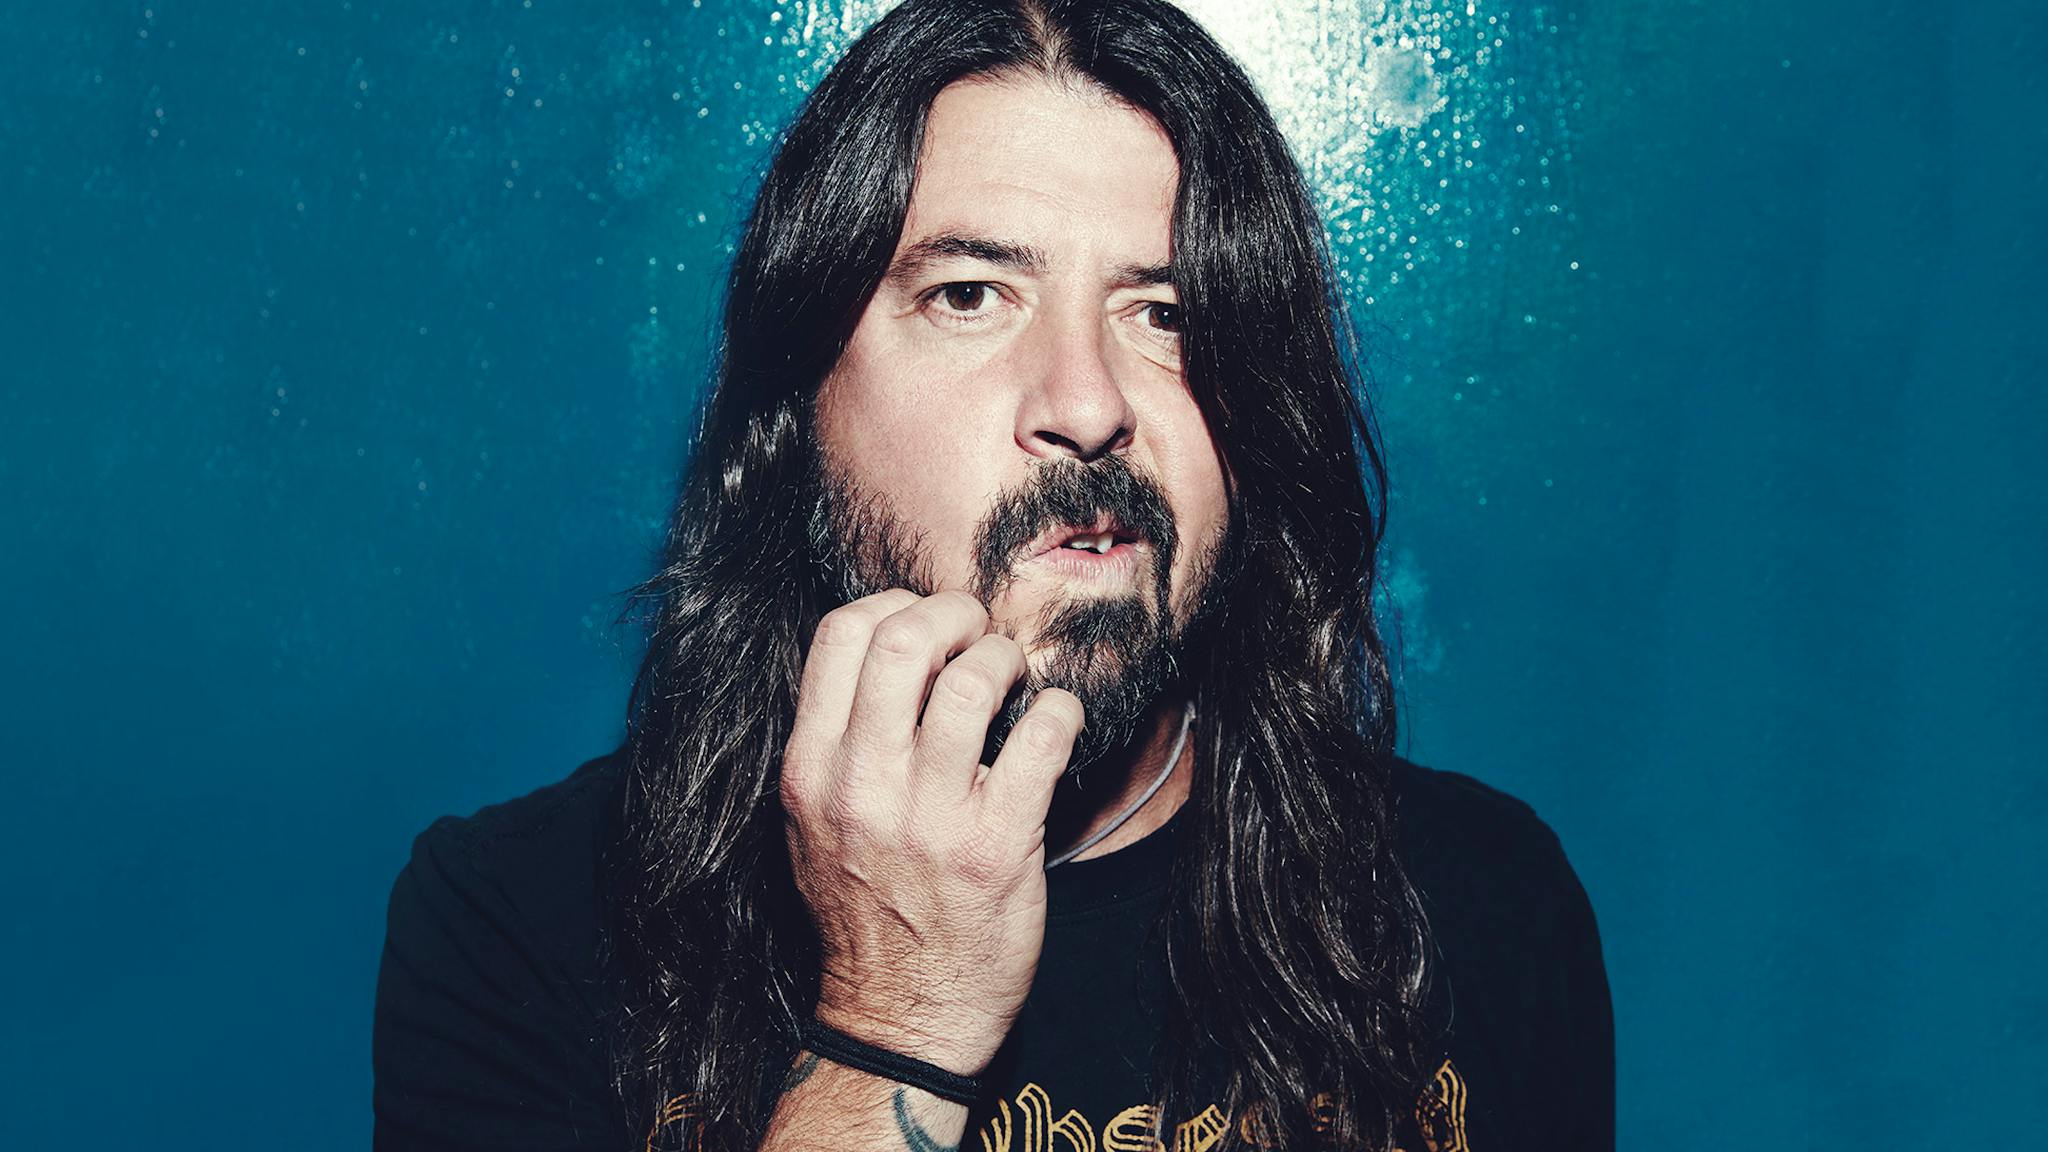 Dave Grohl Shot By Tom Barnes